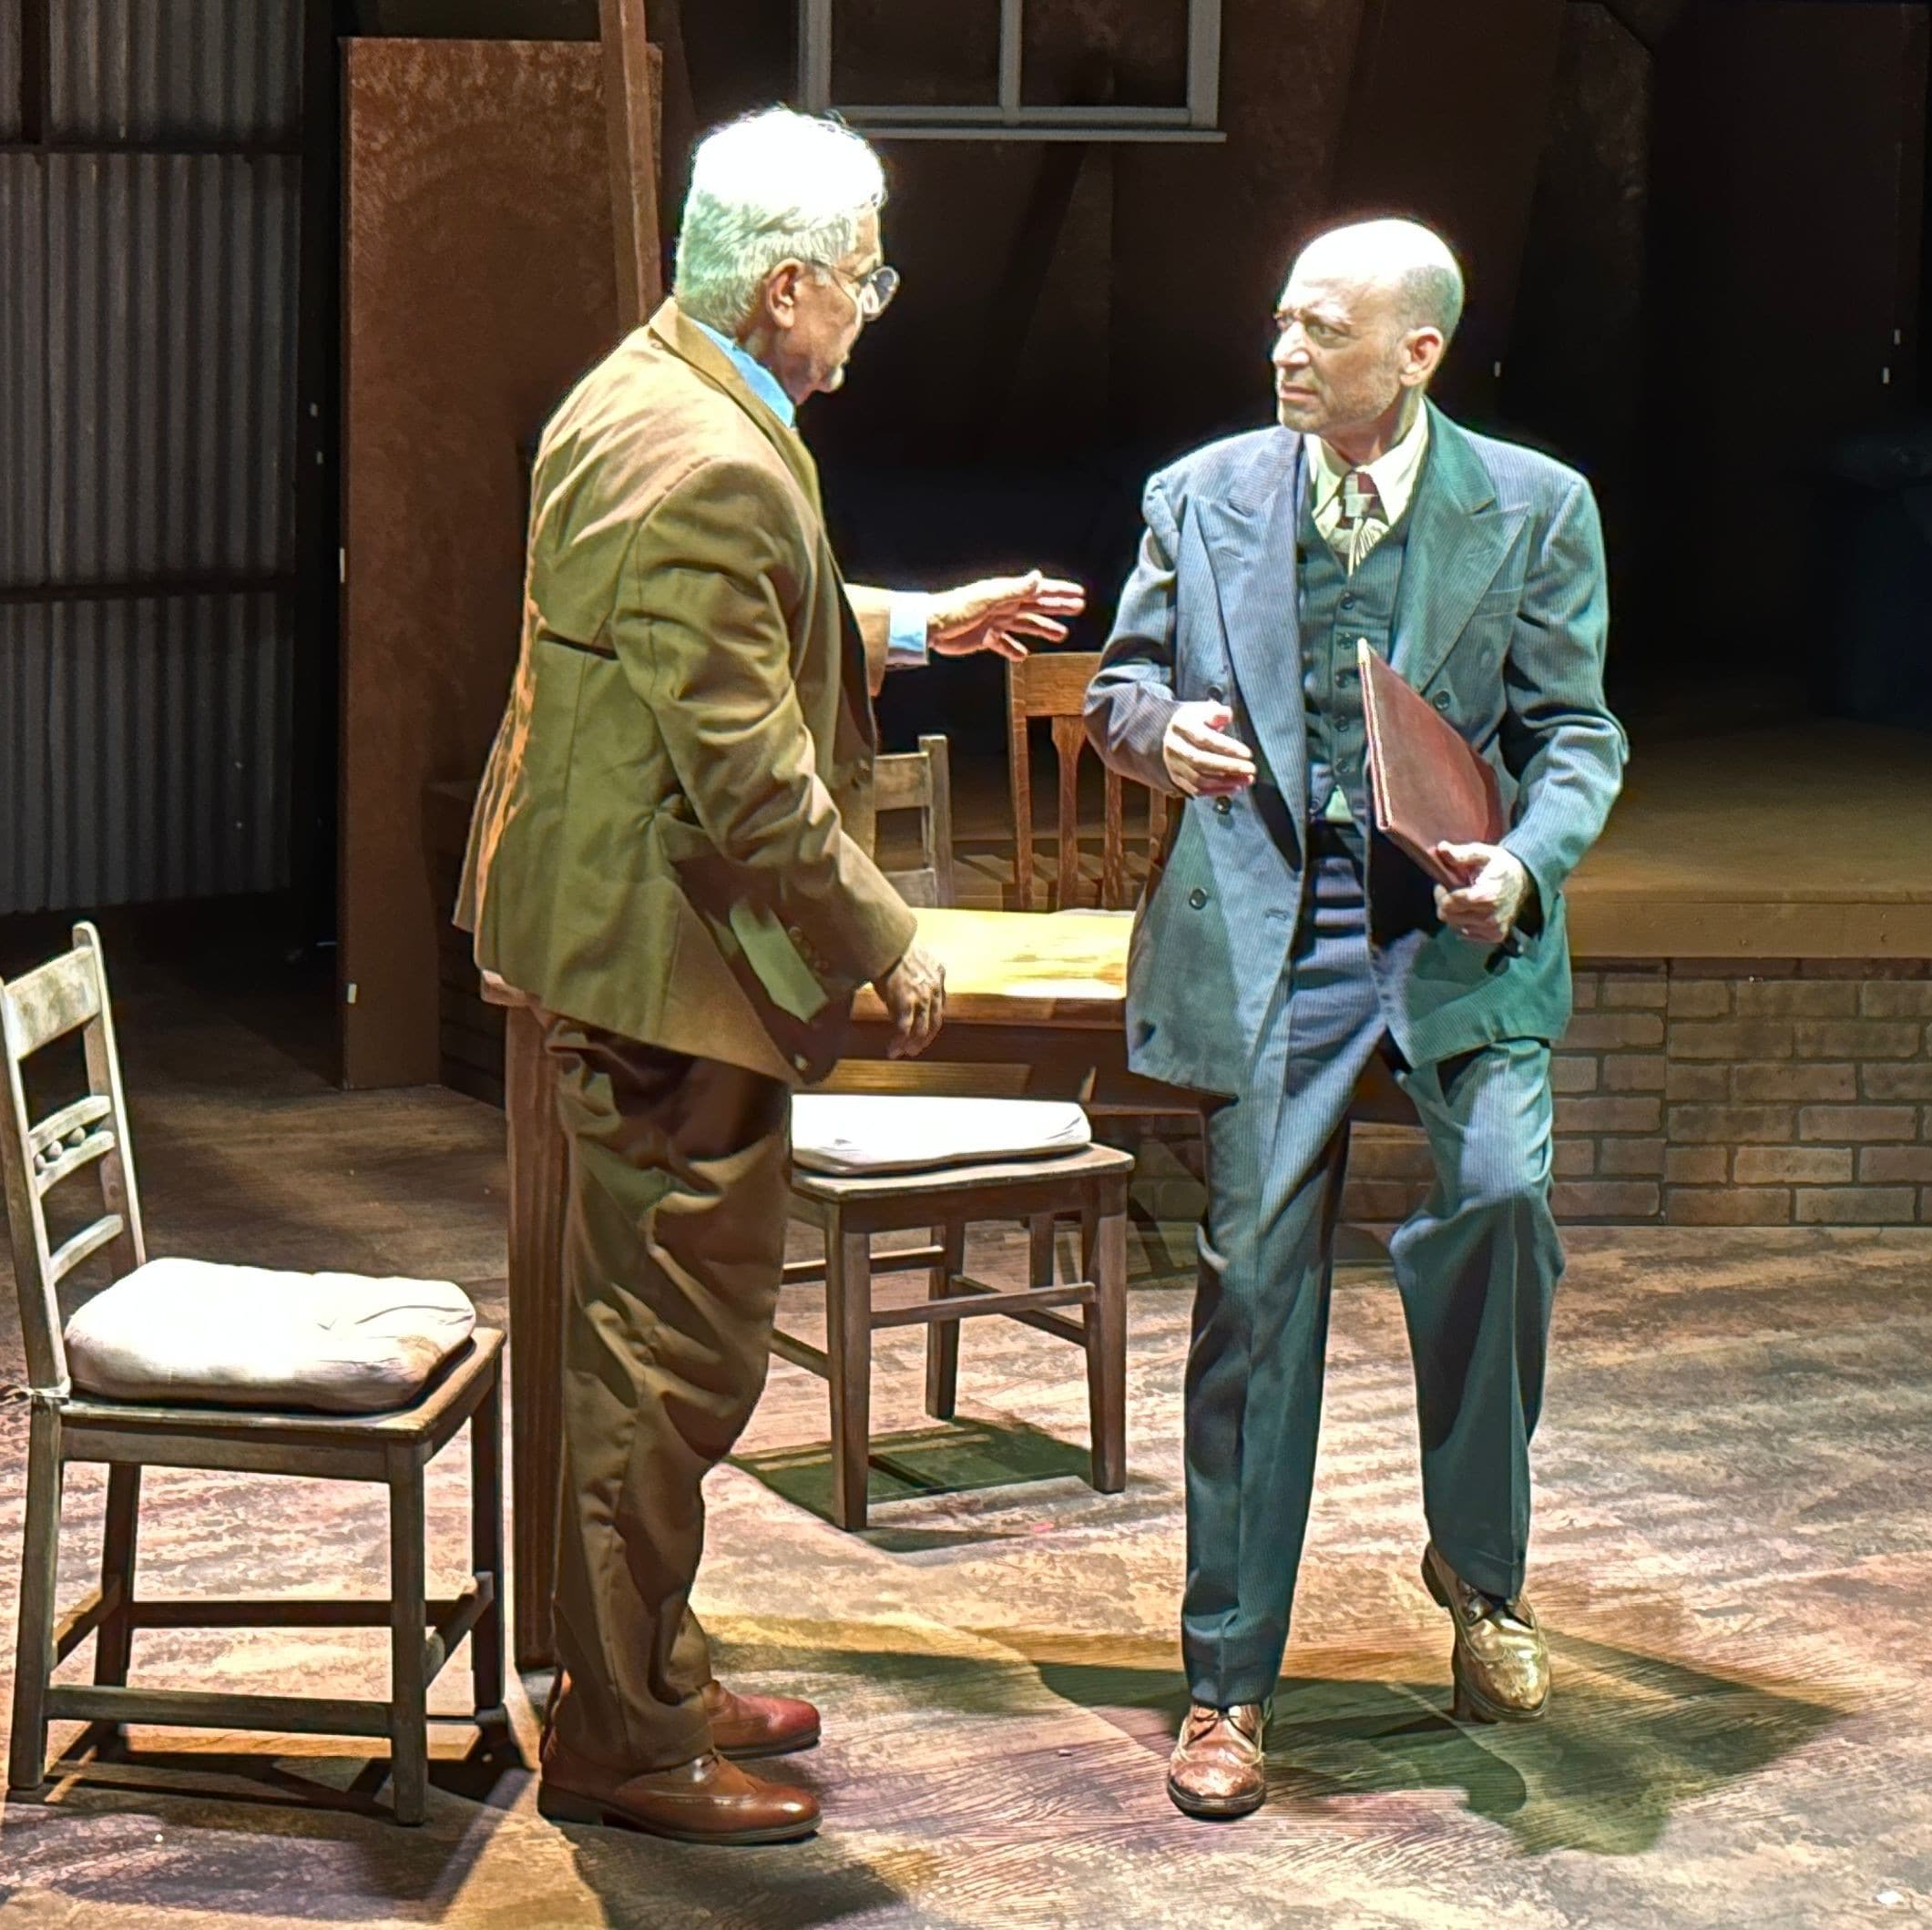 Jeff Blumberg in the role of Howard Wagner in Death of a Salesman at CASA 0101 in Boyle Heights, Los Angeles, California